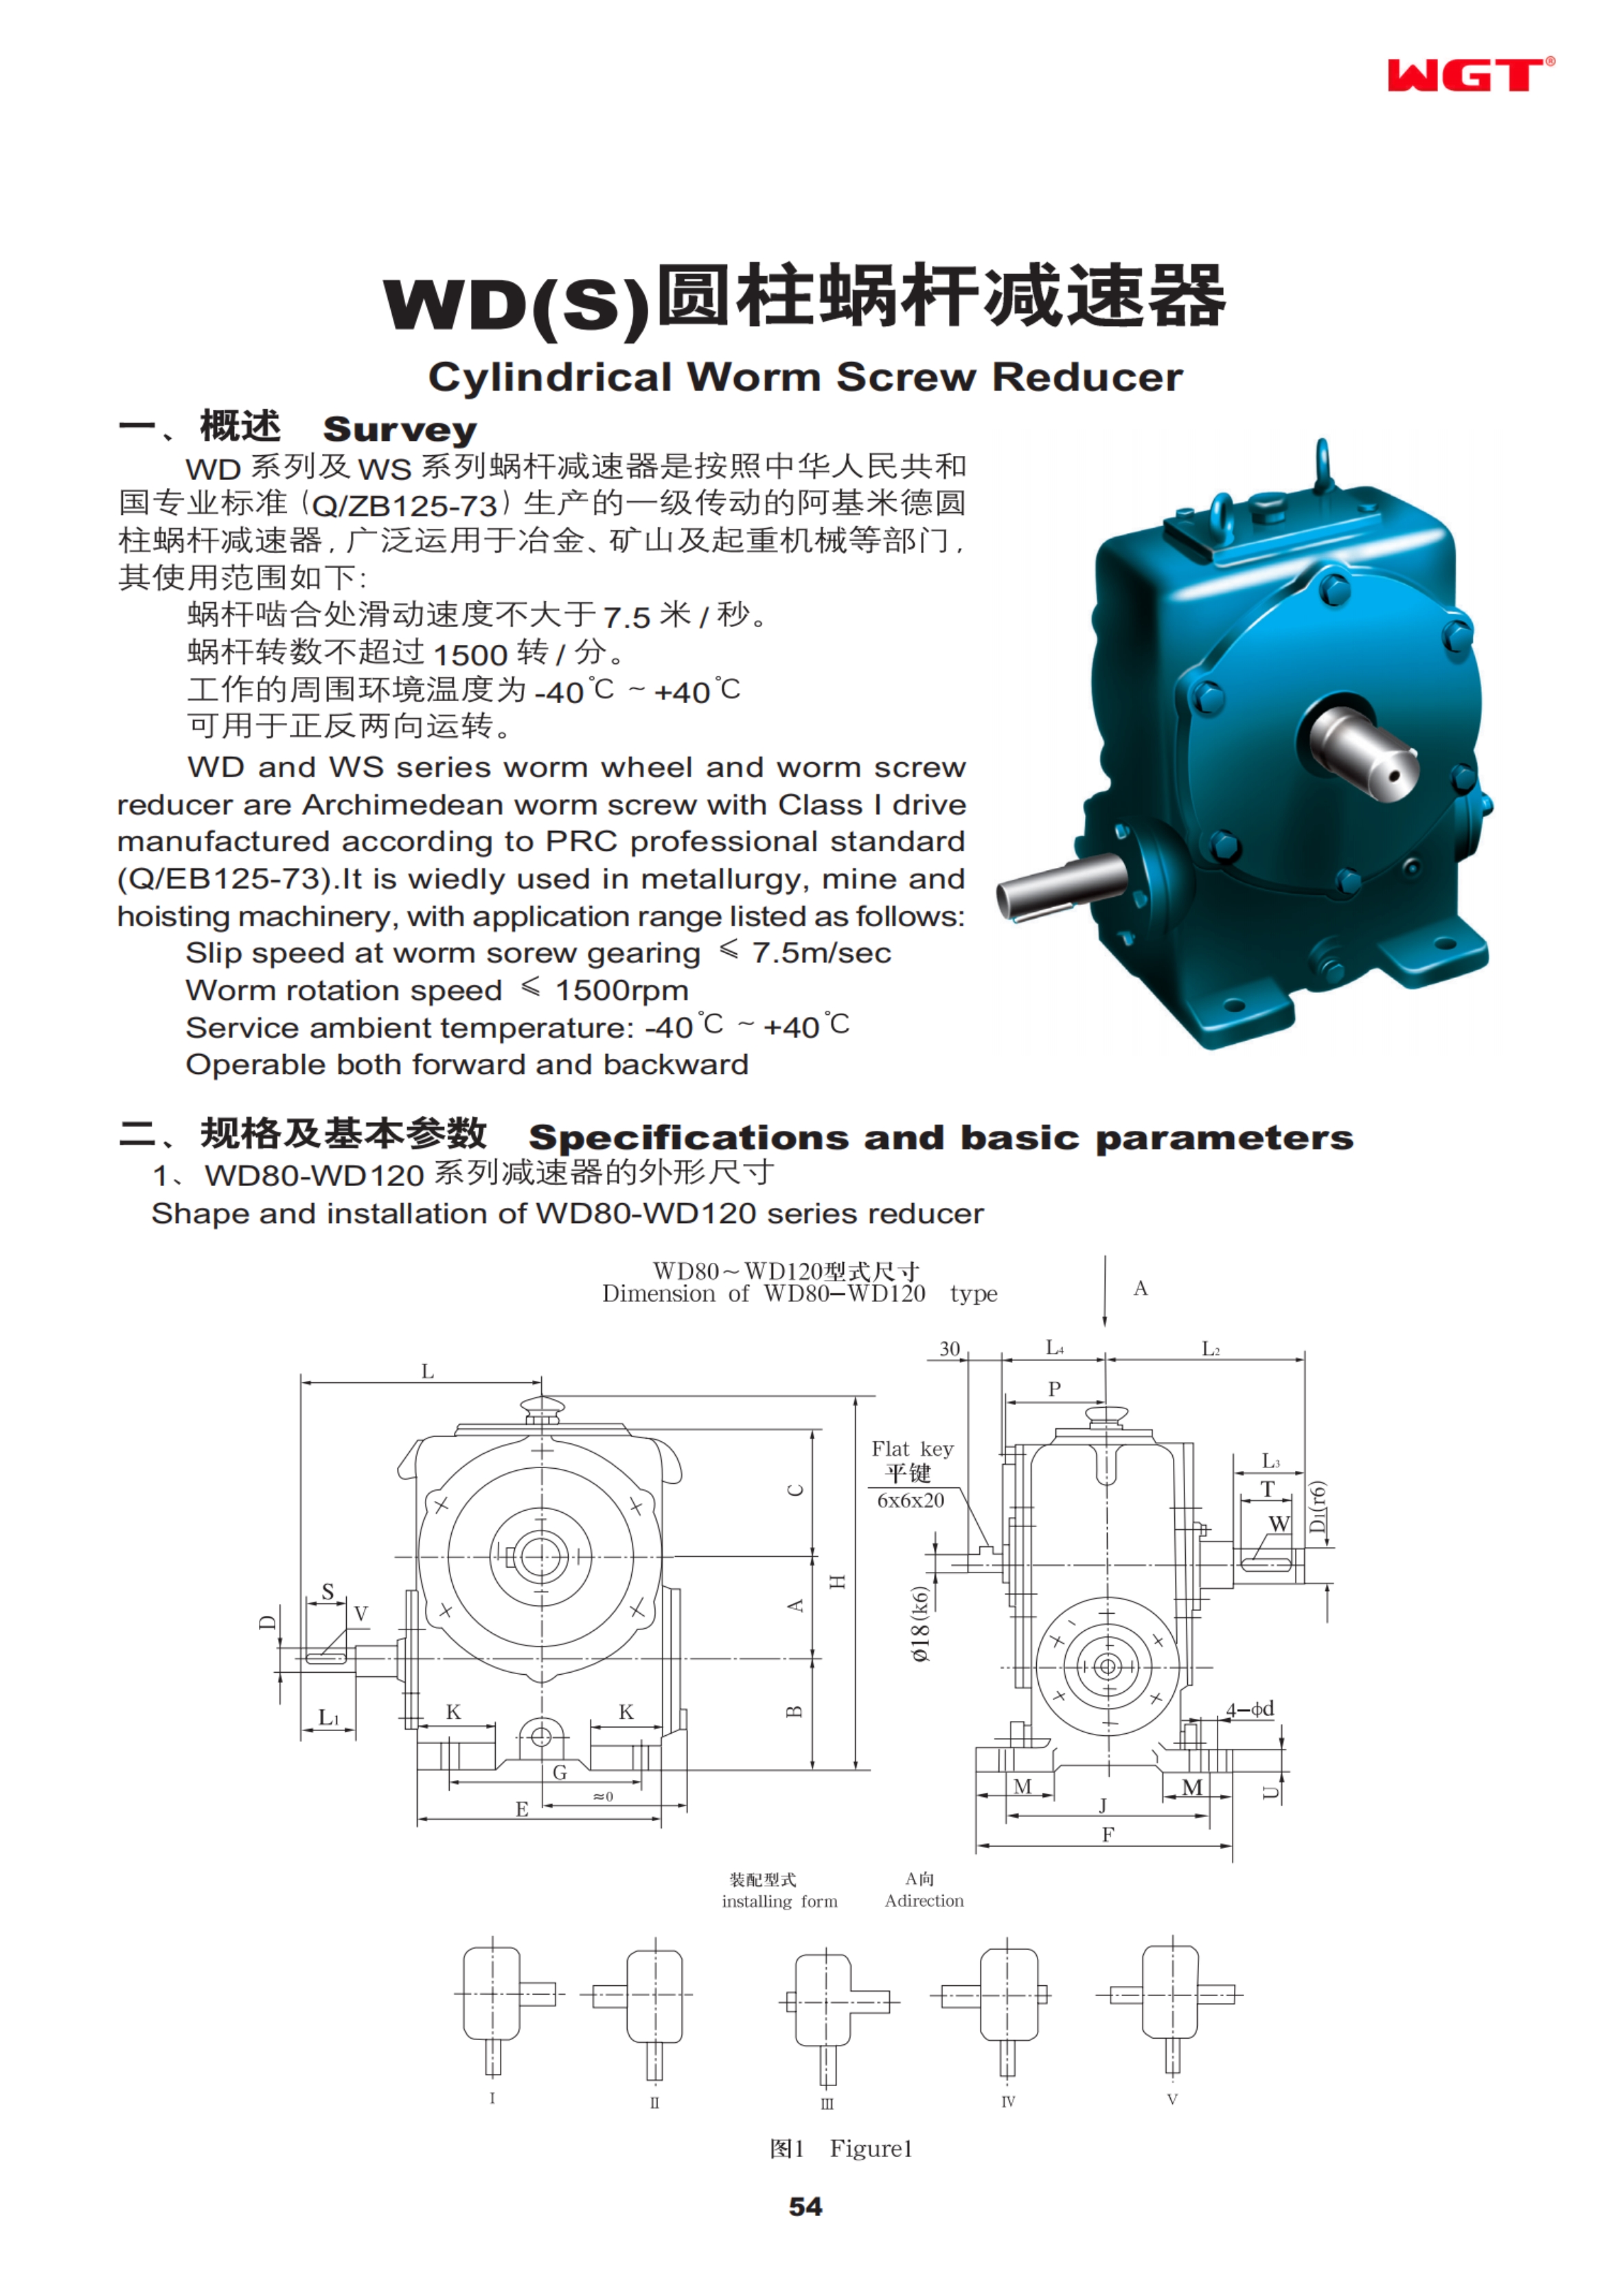 WD250 cylindrical worm reducer WGT